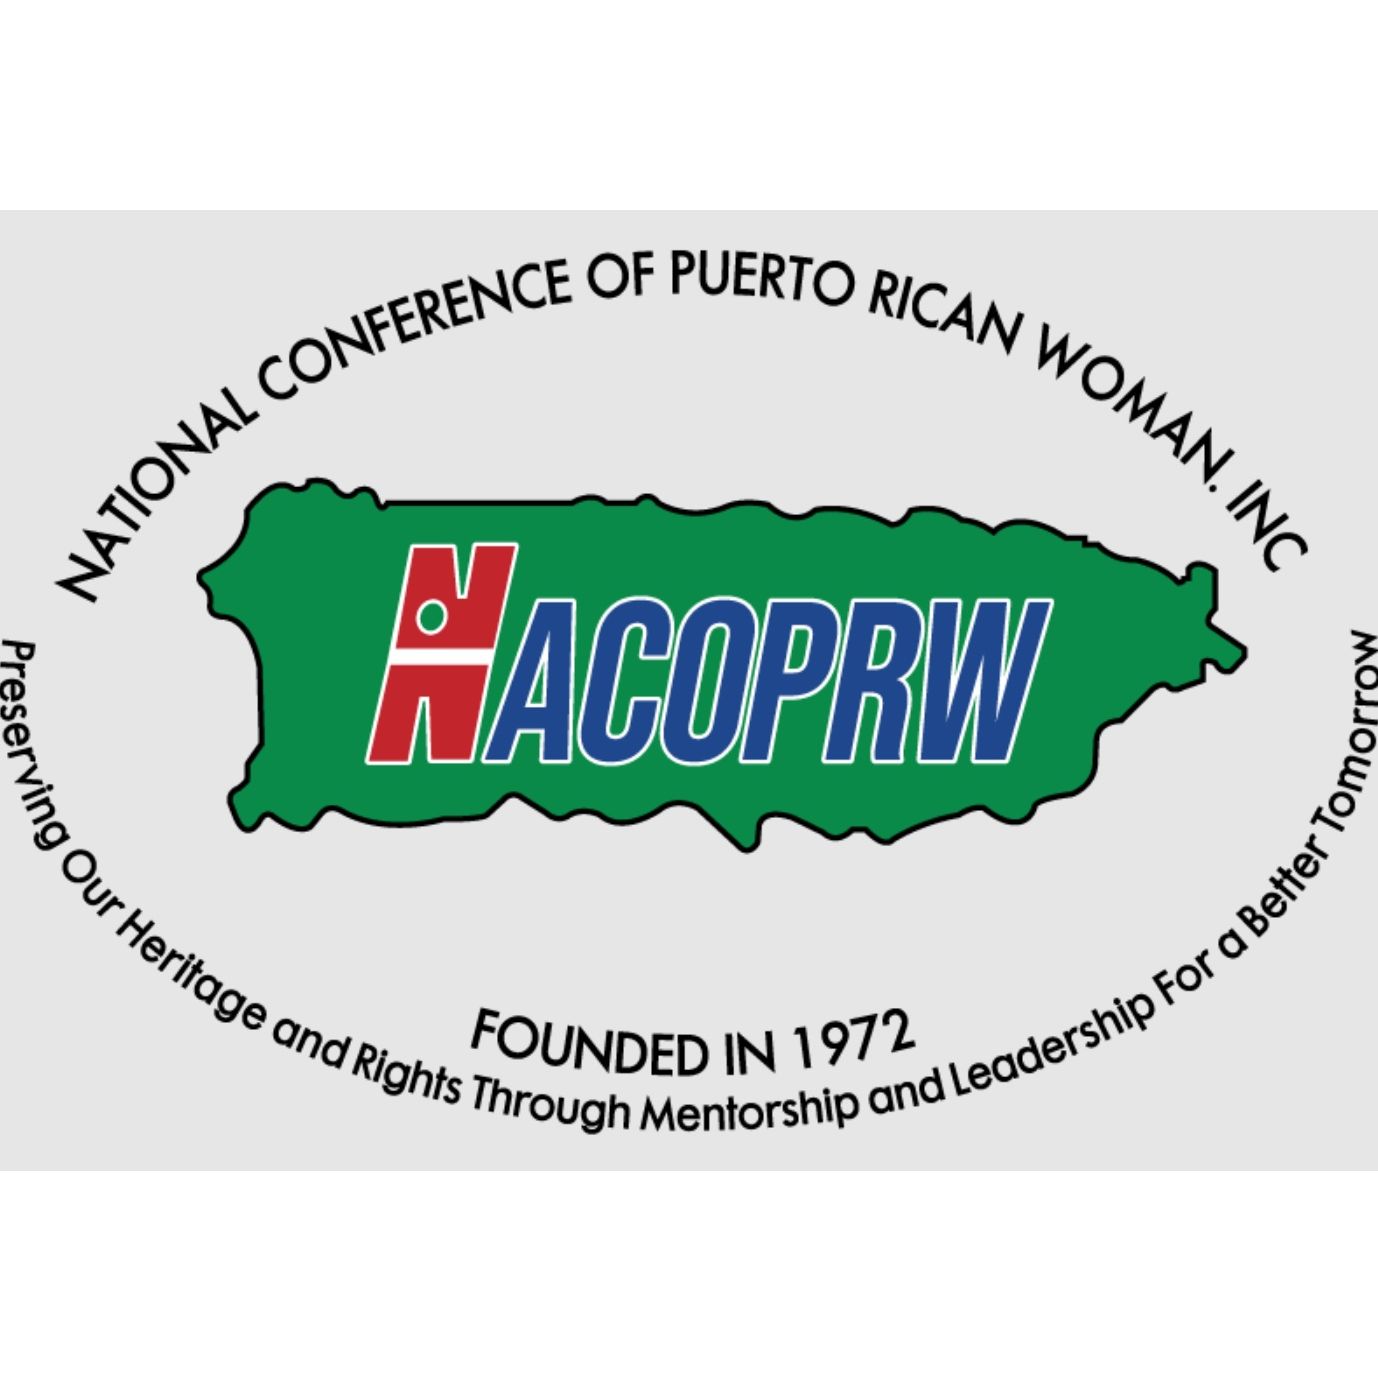 Woman Political Organization in USA - Northern Illinois Chapter of National Conference of Puerto Rican Women